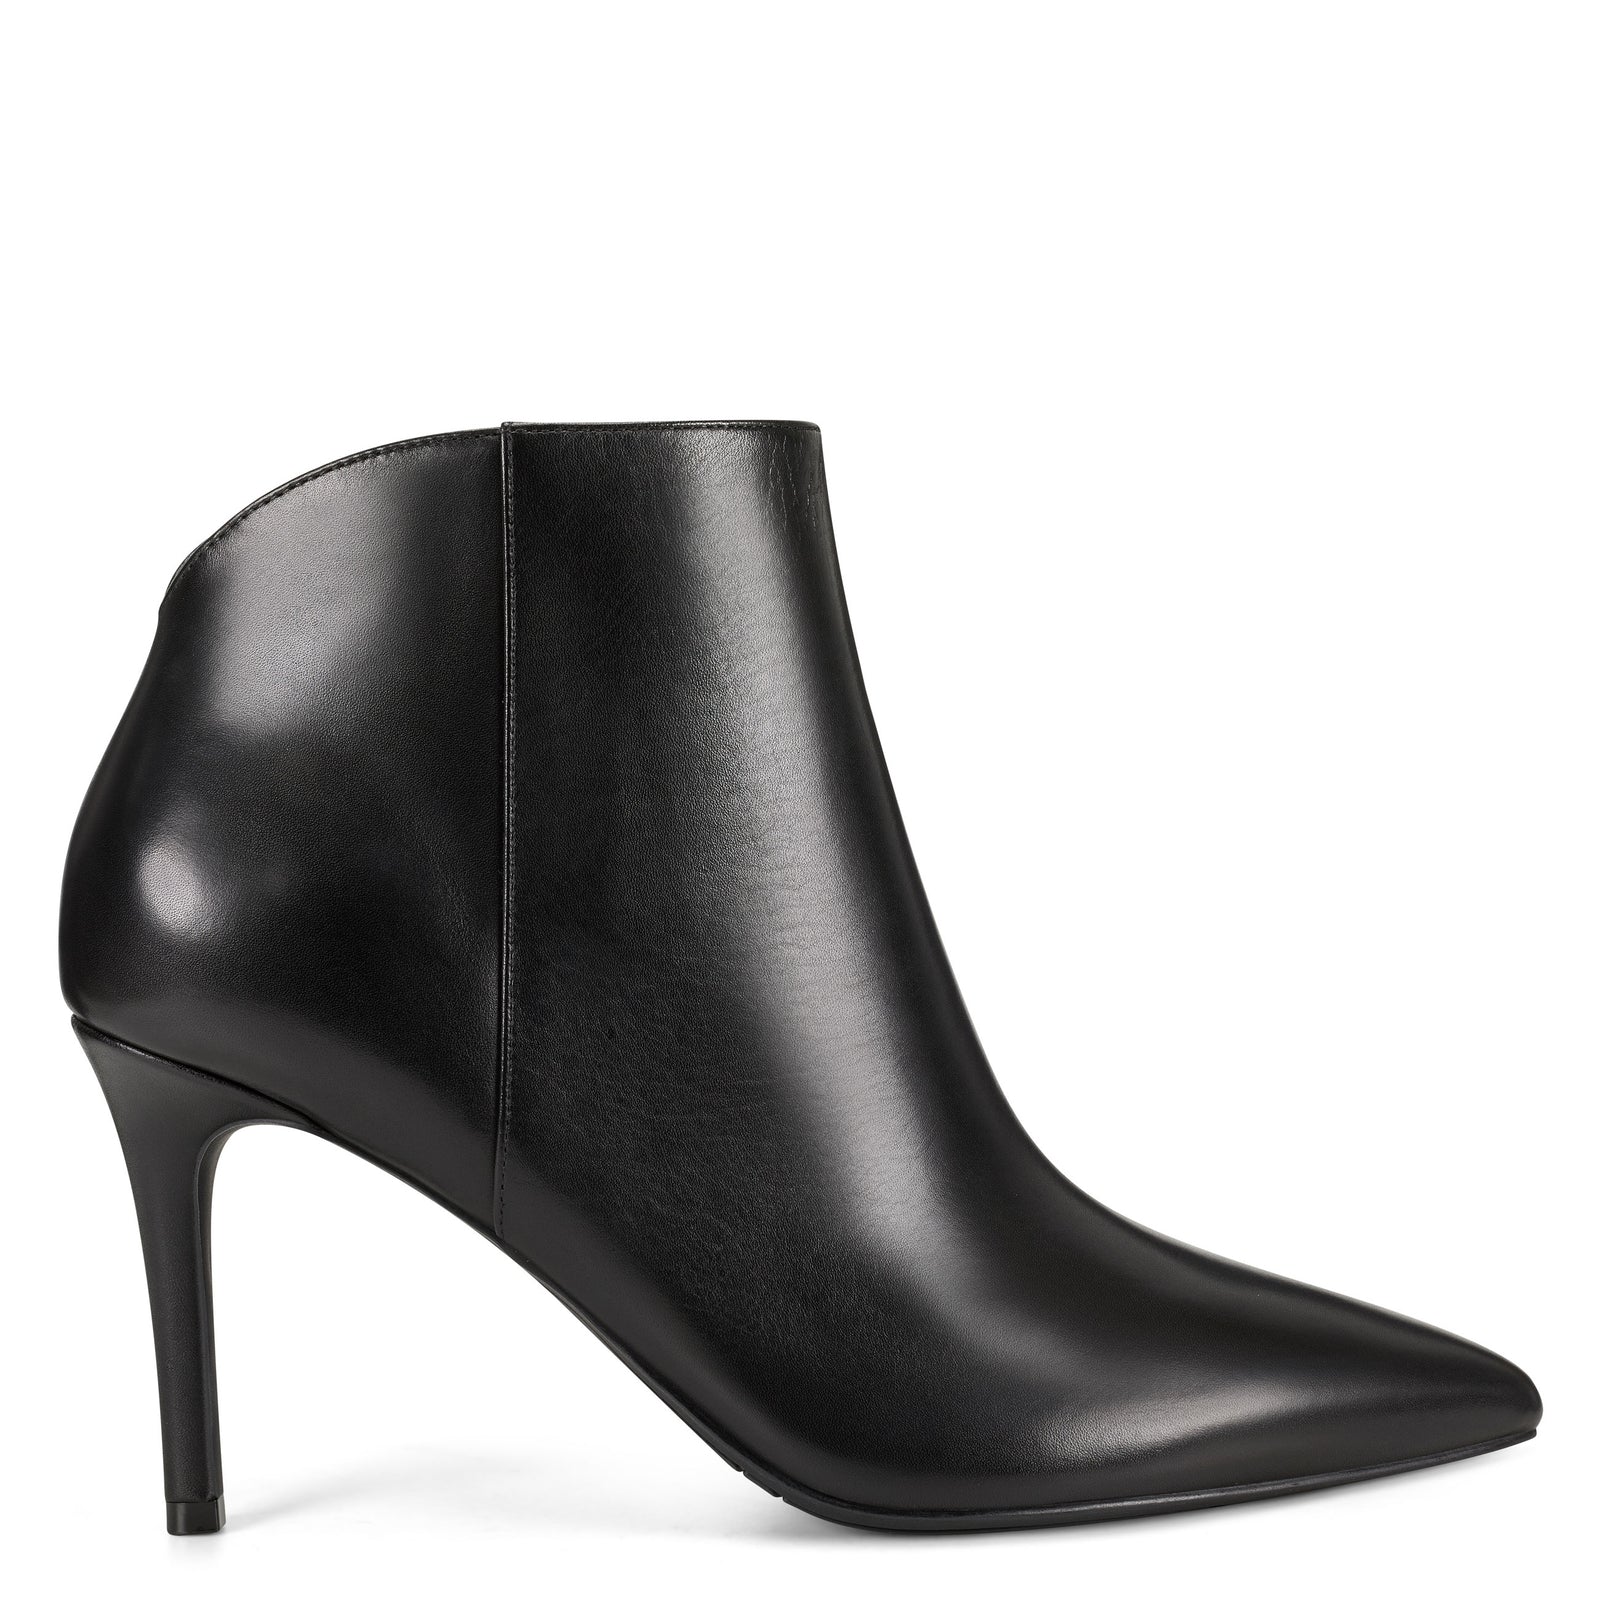 Sale | Nine West comfortable and fashionable shoes and handbags for ...